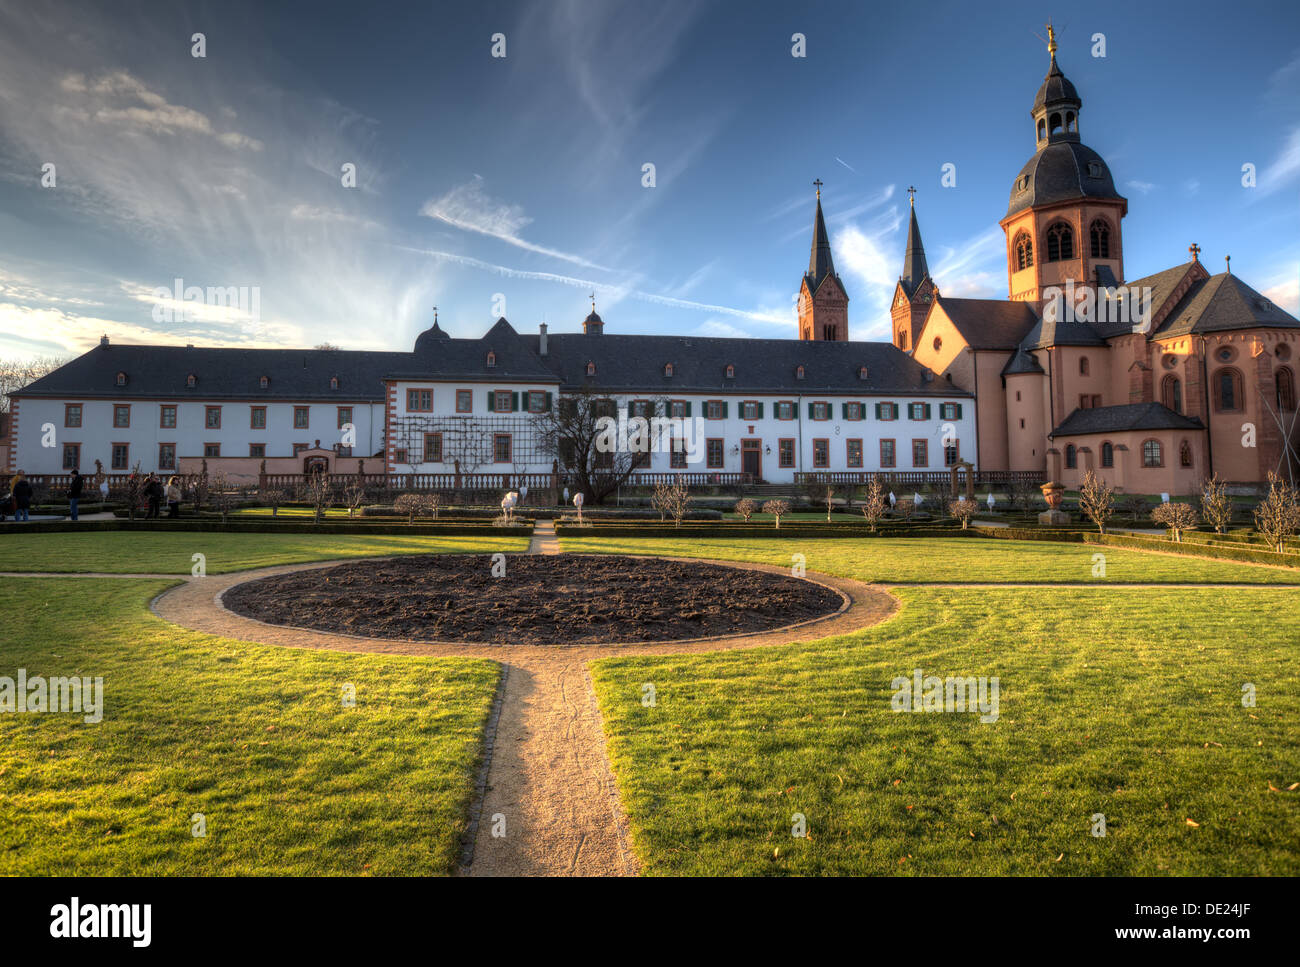 The former Benedictine abbey and herb garden in Seligenstadt. Stock Photo